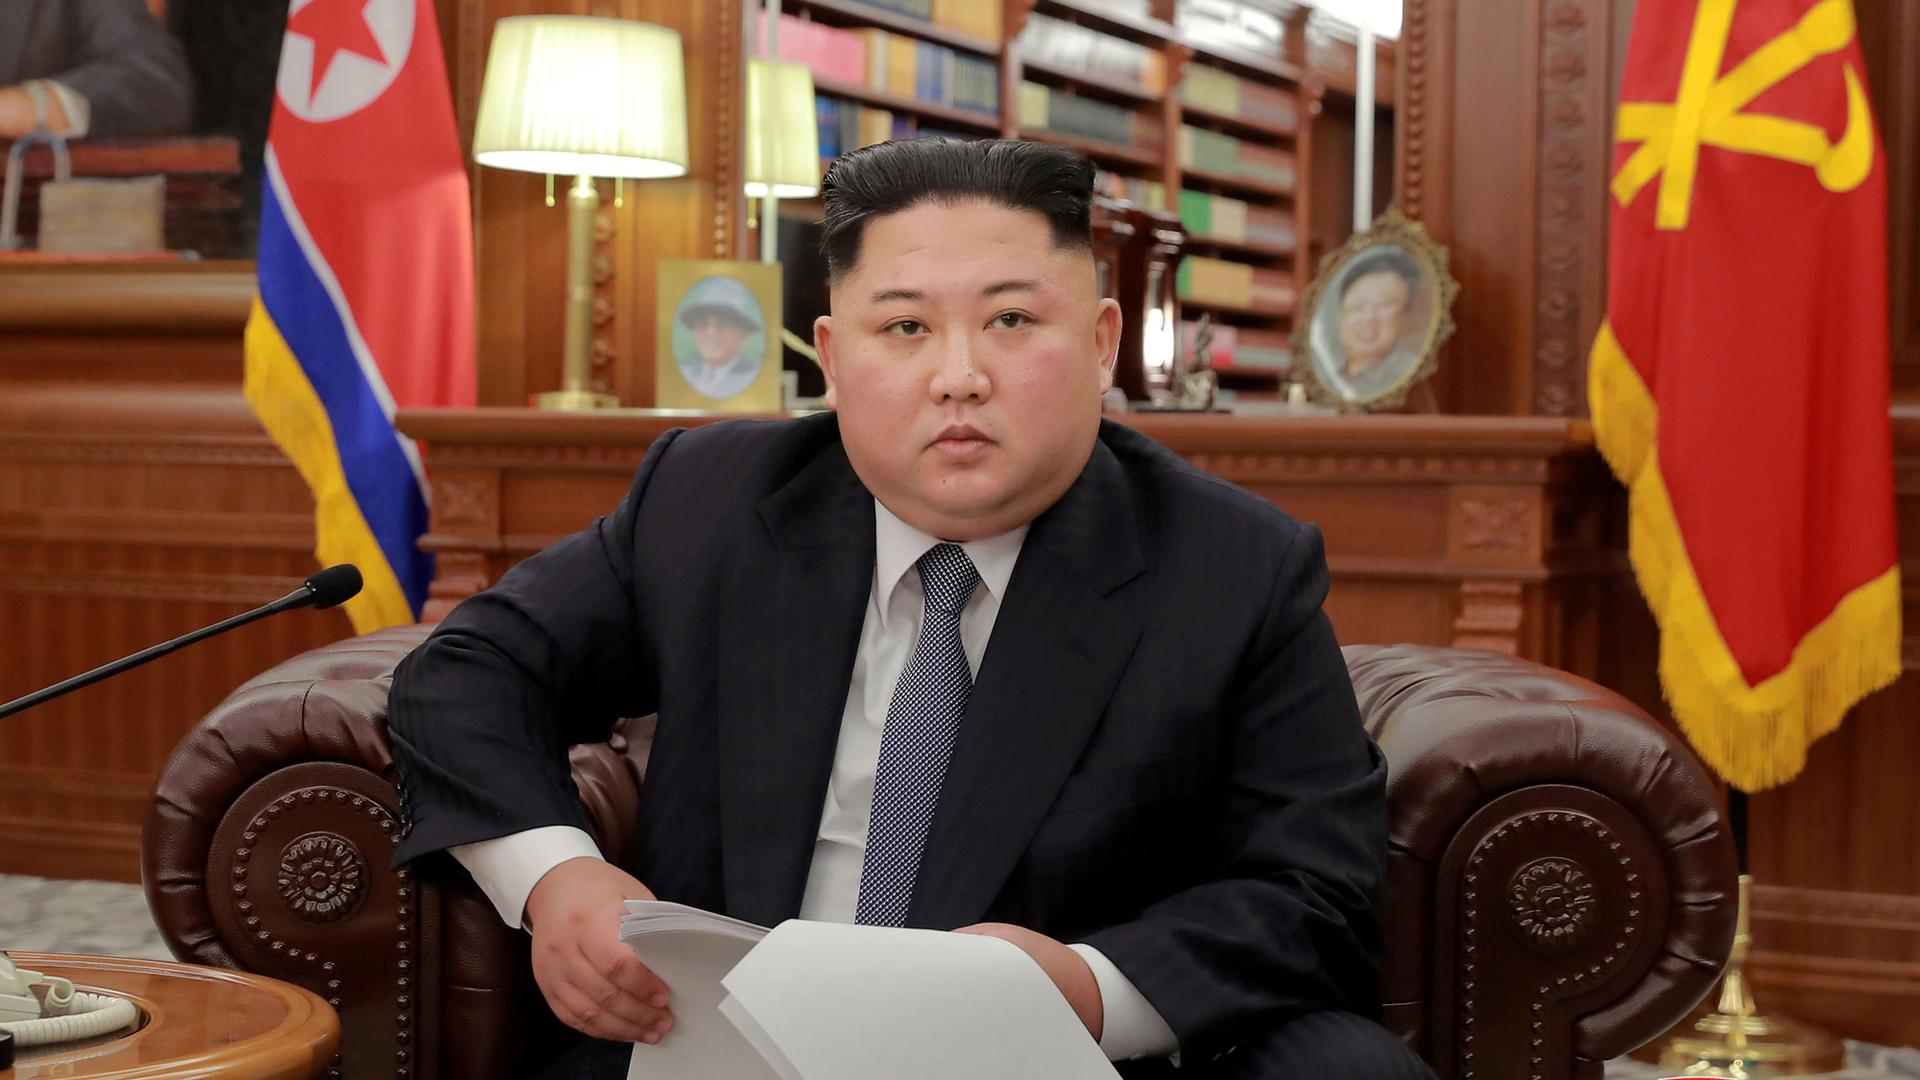 North Korean leader Kim Jong-un is shown in this file photo wearing a dark suit and sitting in a leather armchair.